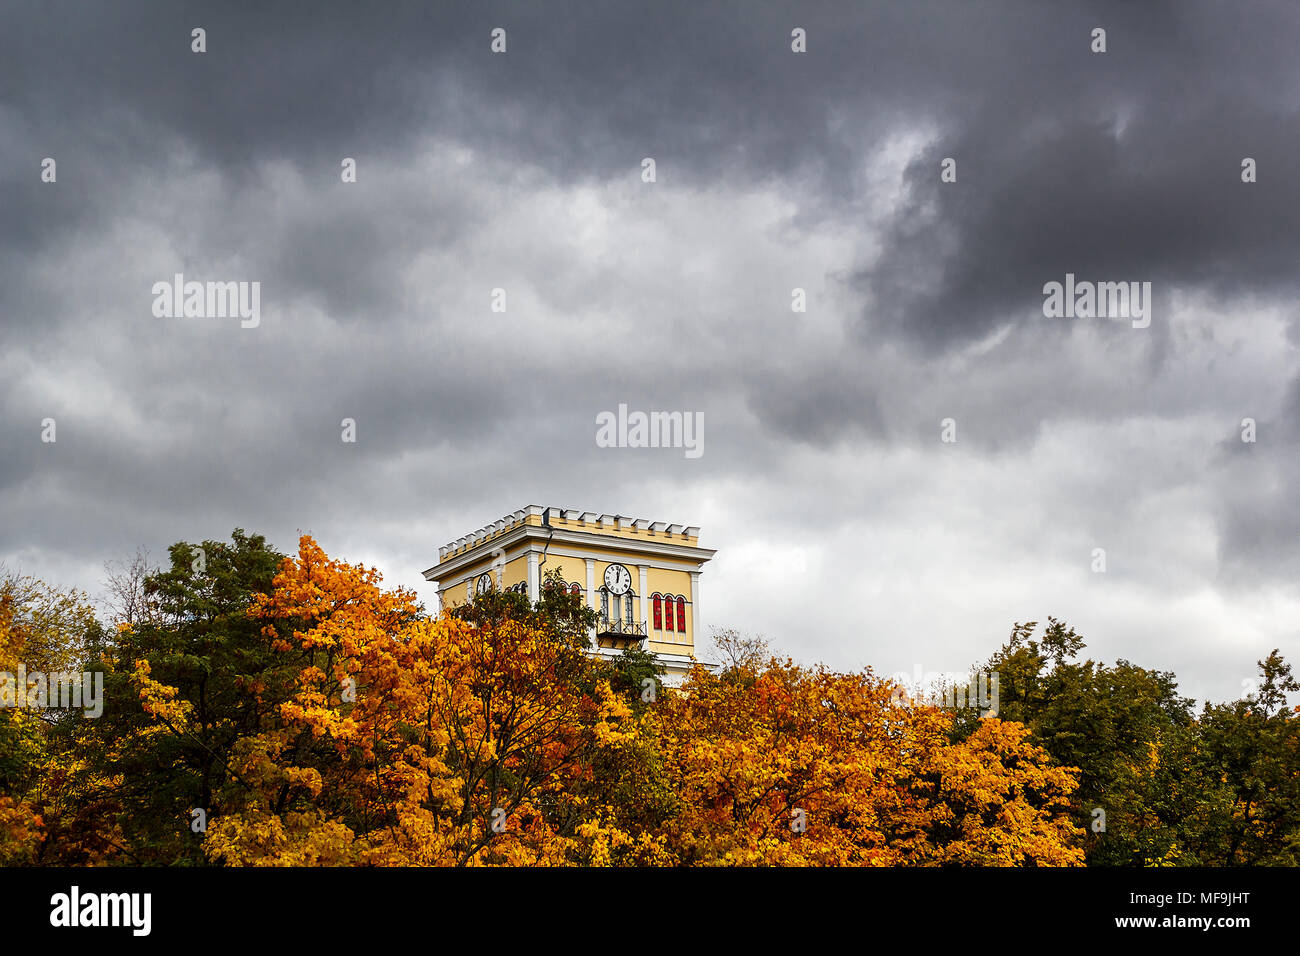 A tall building with a clock against an approaching storm in the sky. An ancient building among the foliage and the approaching thunderstorm Stock Photo